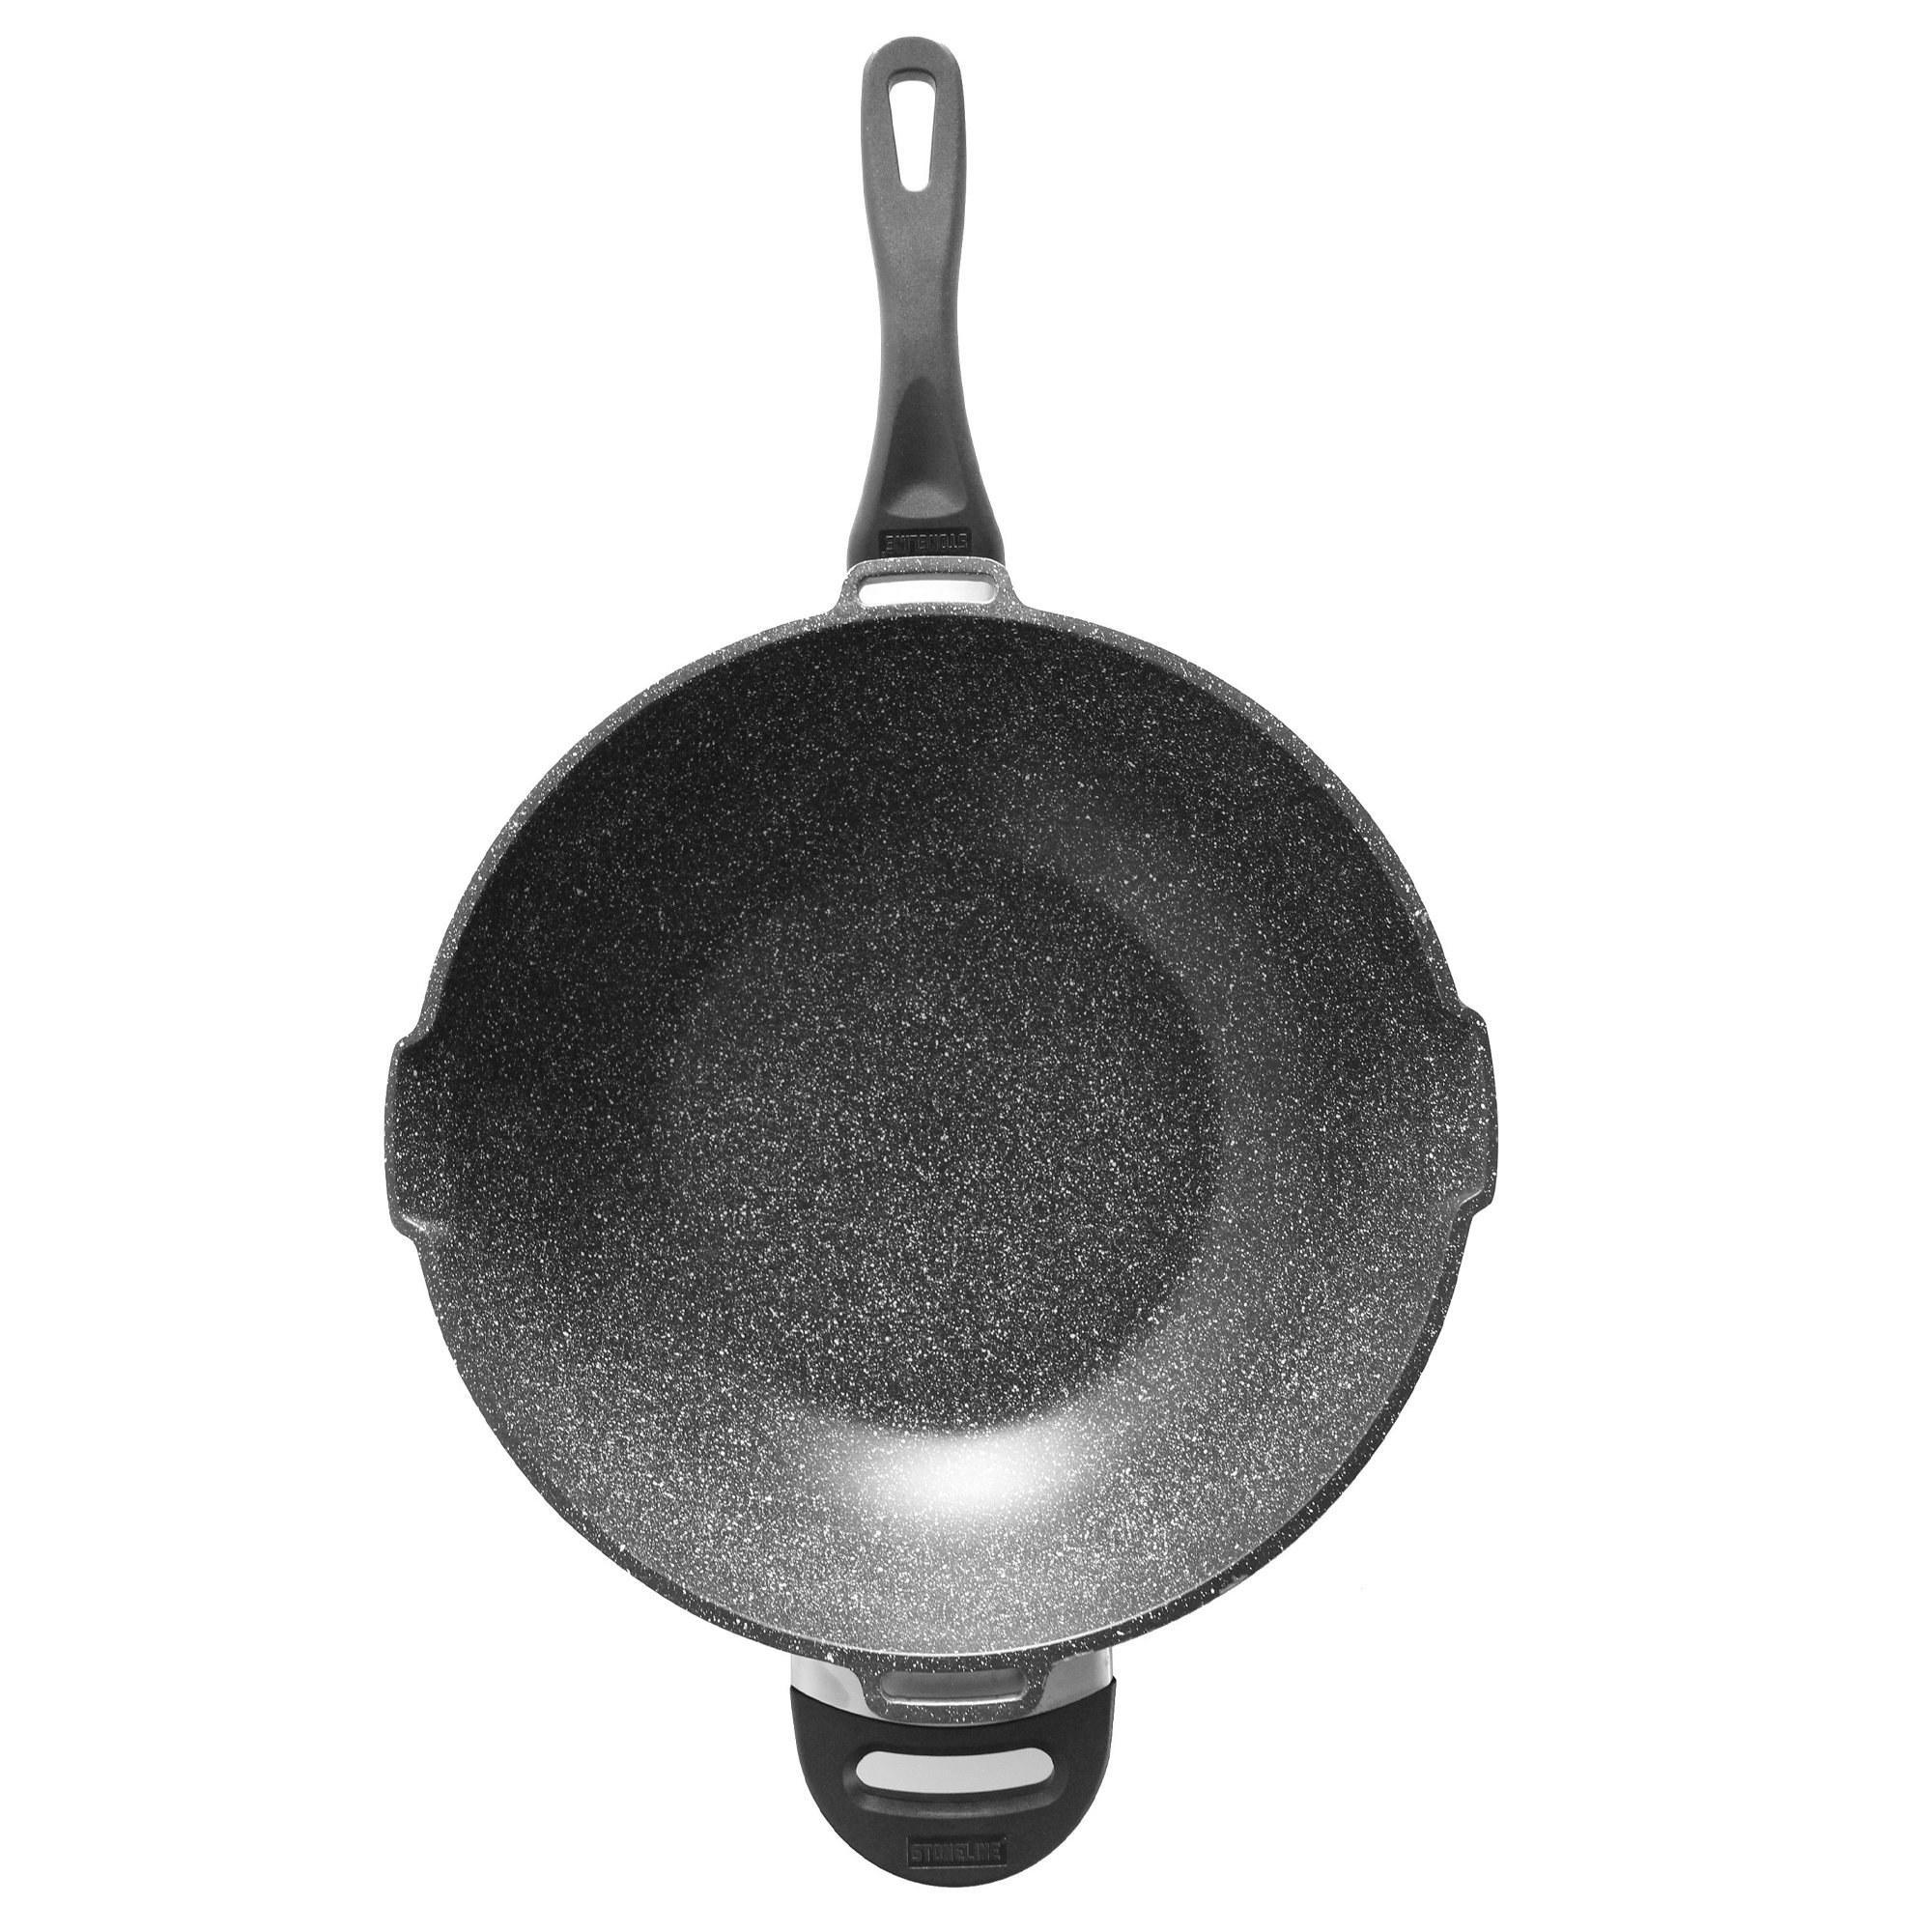 STONELINE® FUTURE wok pan 32 cm, interchangeable handles, with sieve glass lid, suitable for induction